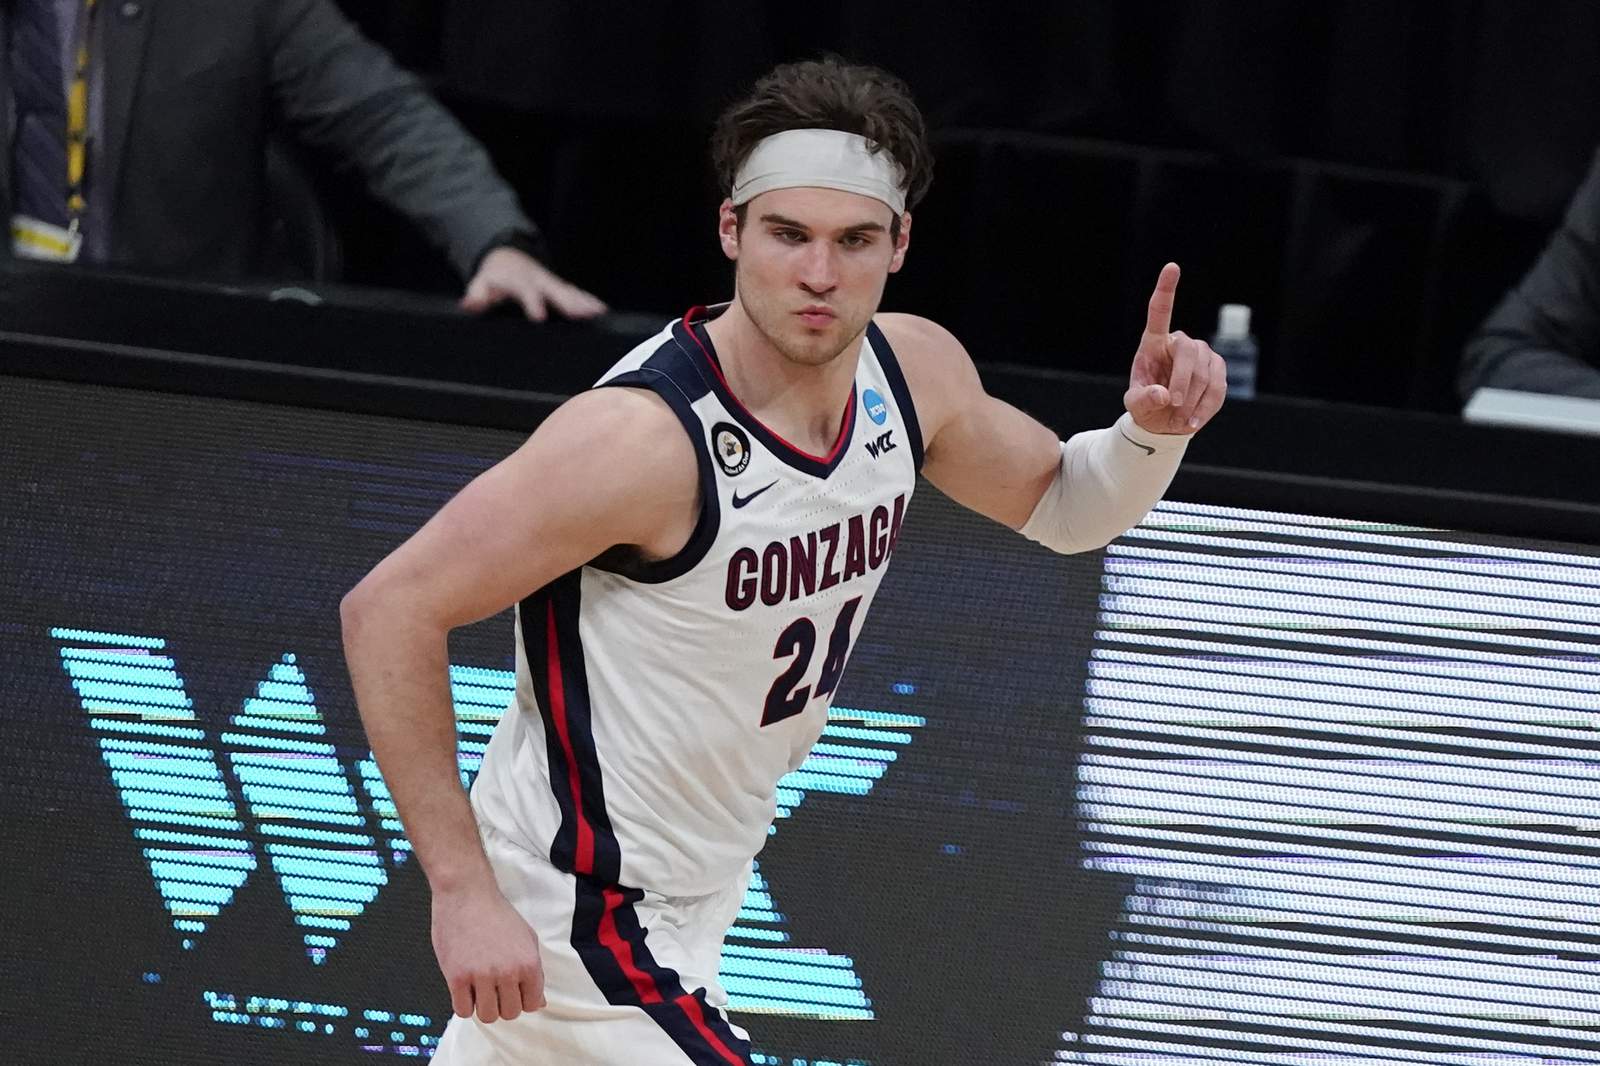 Gonzaga's bid for a perfect season moves on to Final Four